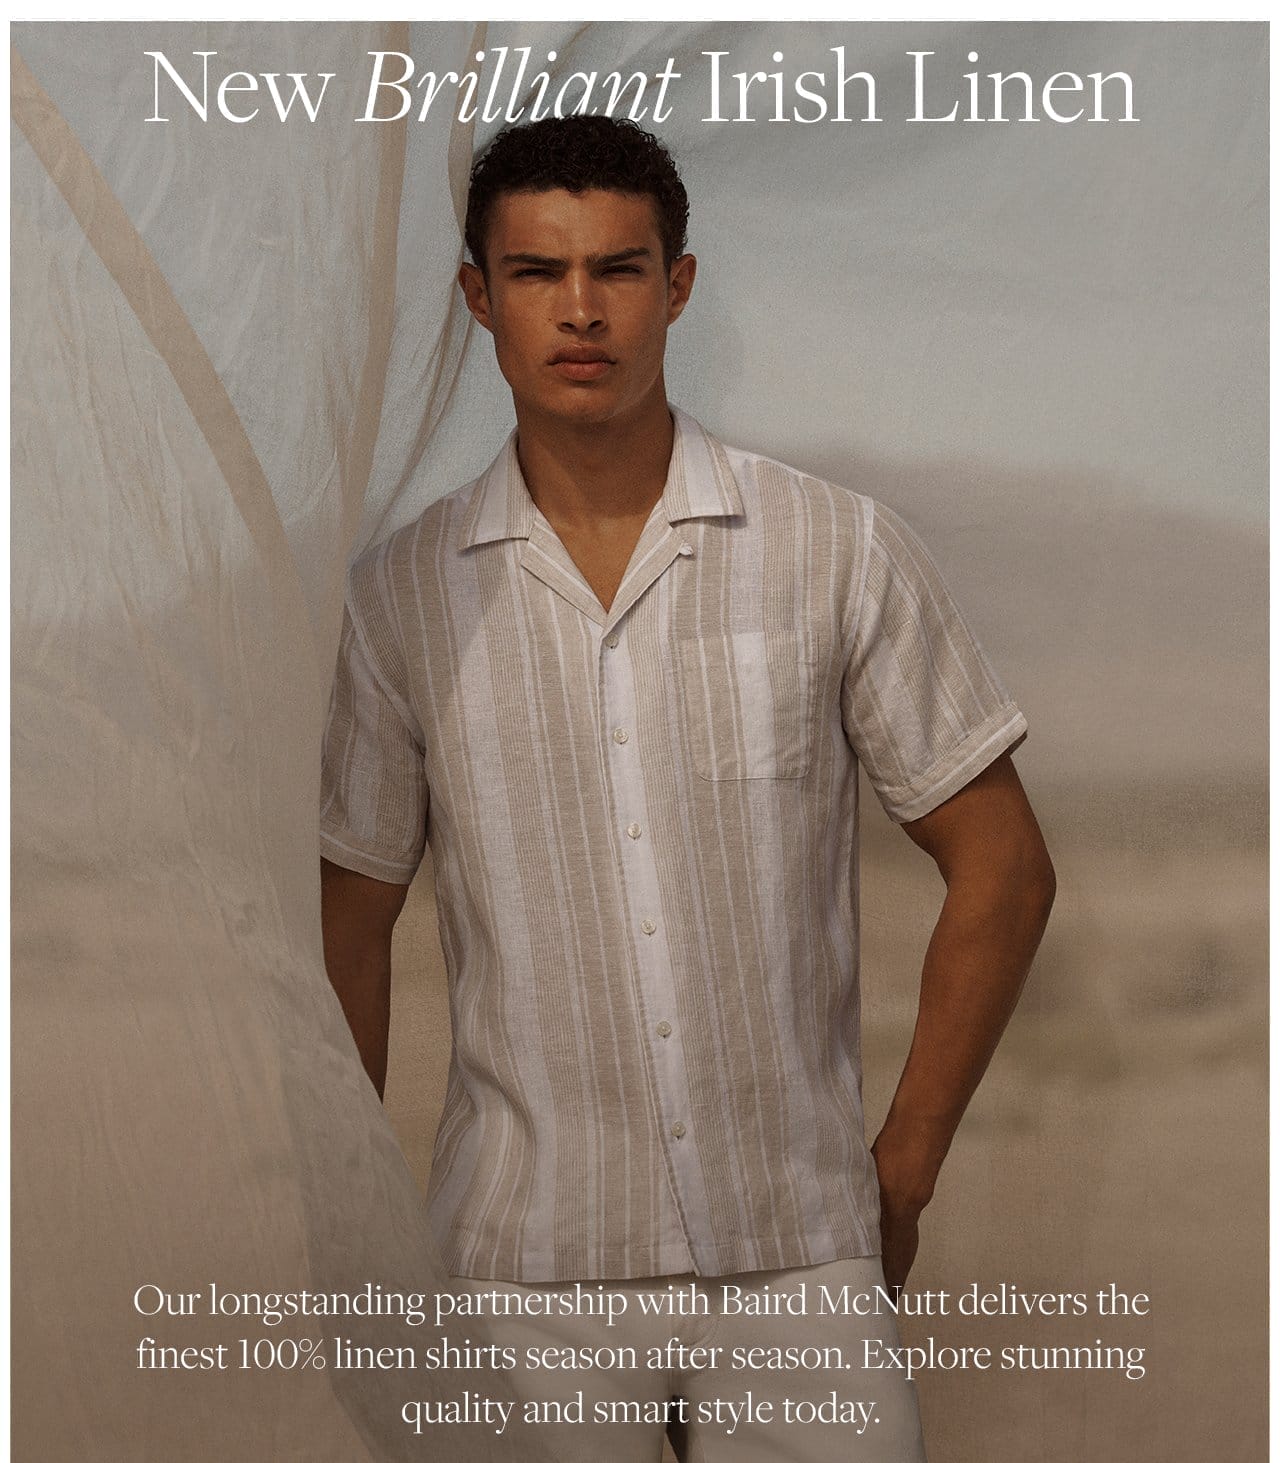 New Brilliant Irish Linen Our longstanding partnership with Baird McNutt delivers the finest 100% linen shirts season after season. Explore stunning quality and smart style today